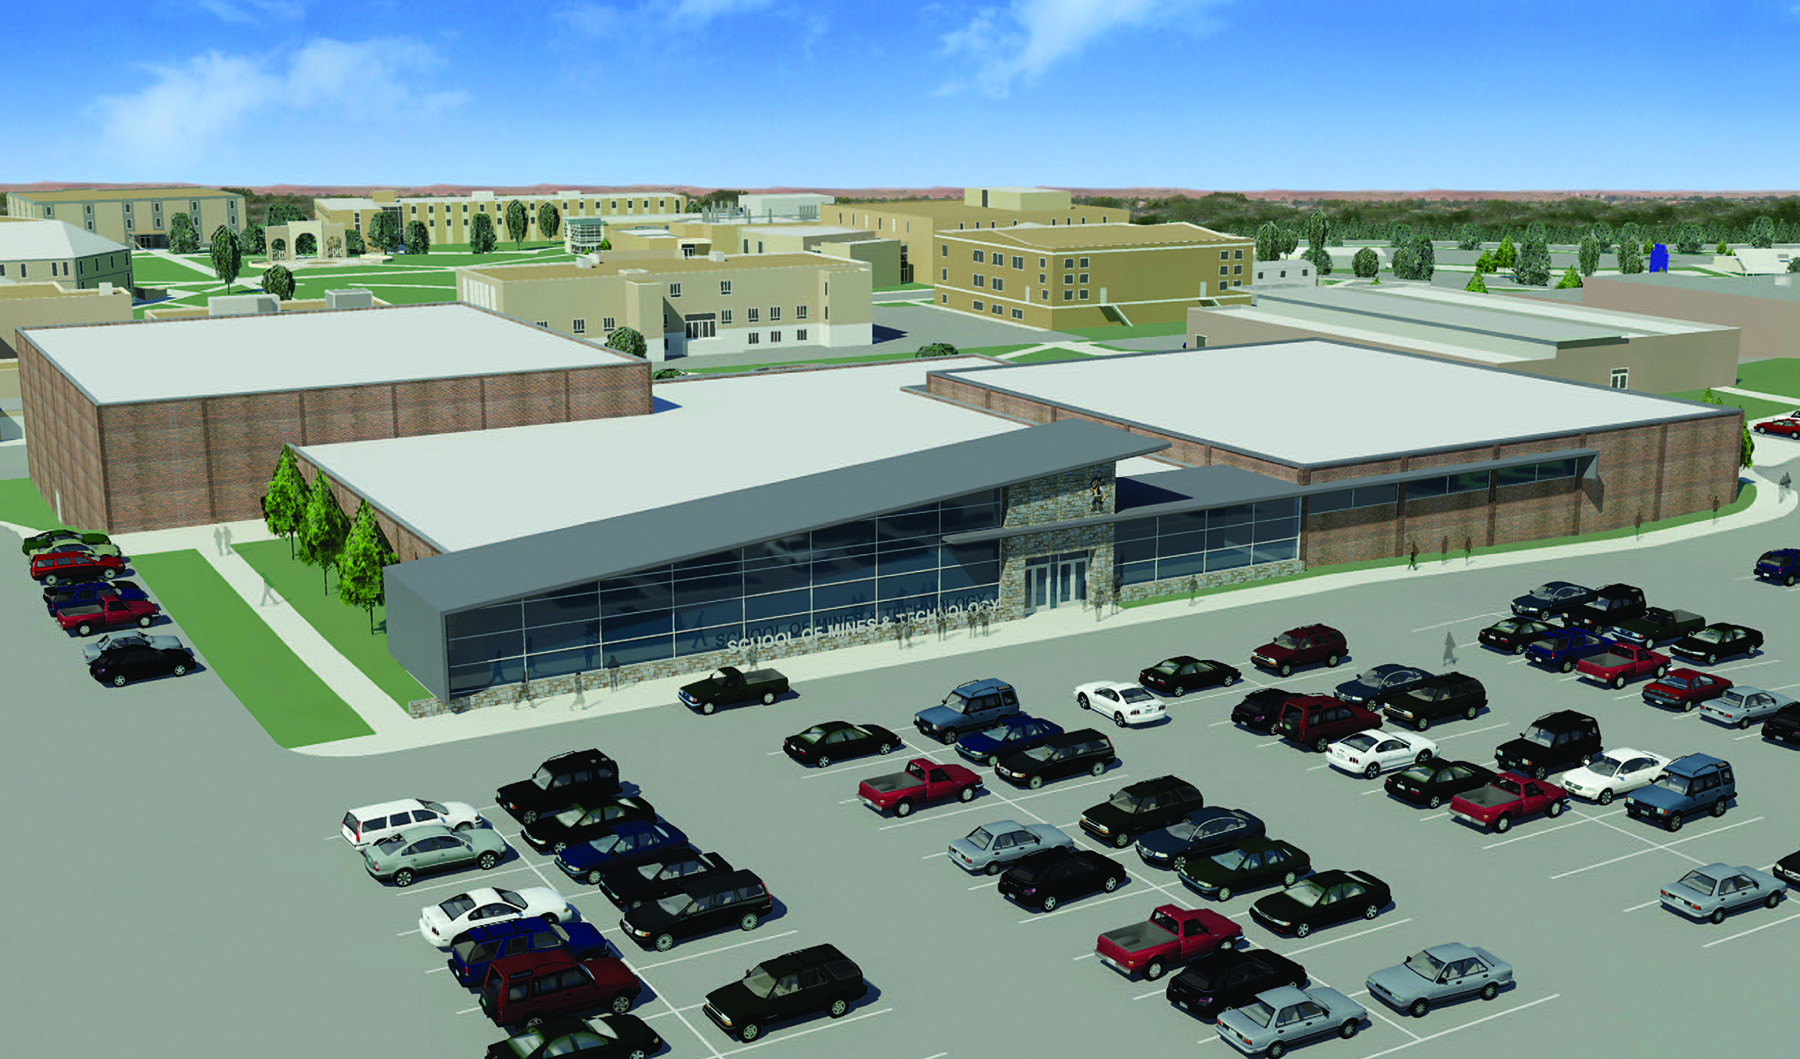 Architect's drawing of the Stephen D. Newlin Family Student Wellness & Recreation Center at SDSM&T, Rapid City, S.D.